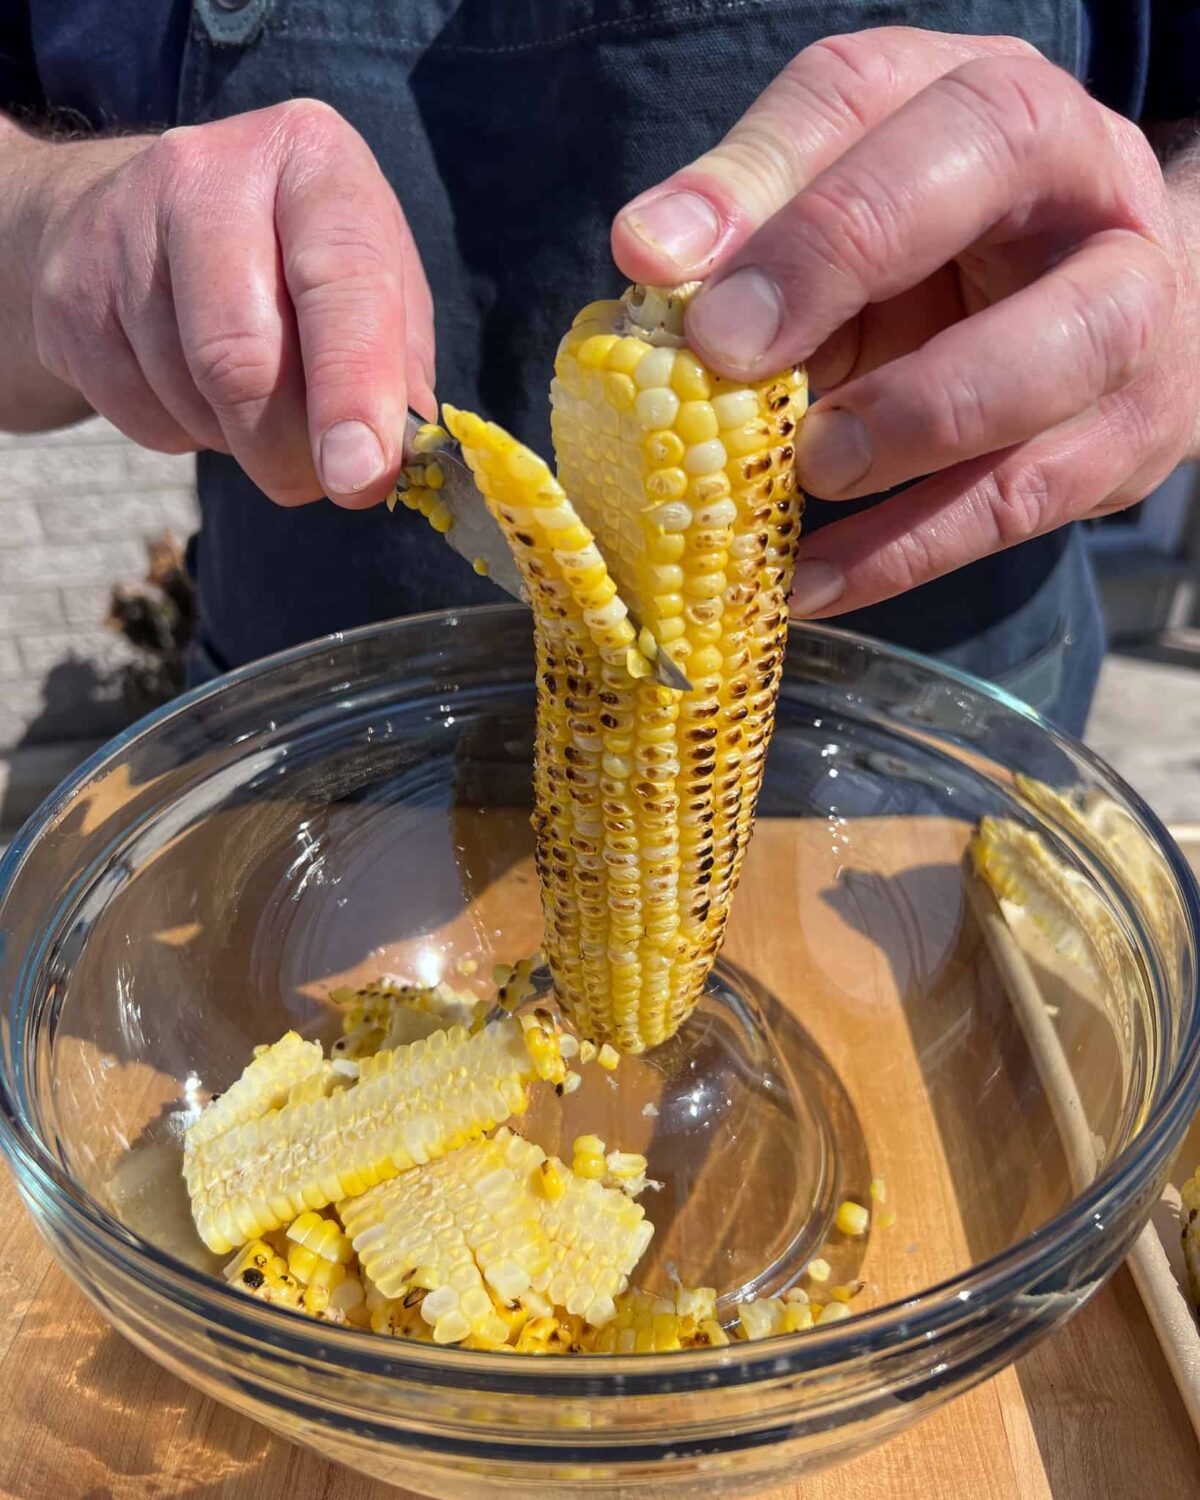 Stand each ear of corn on a smaller bowl (that is upside down) within a large bowl. Using a sharp knife, cut down along the cob to strip off the kernels.